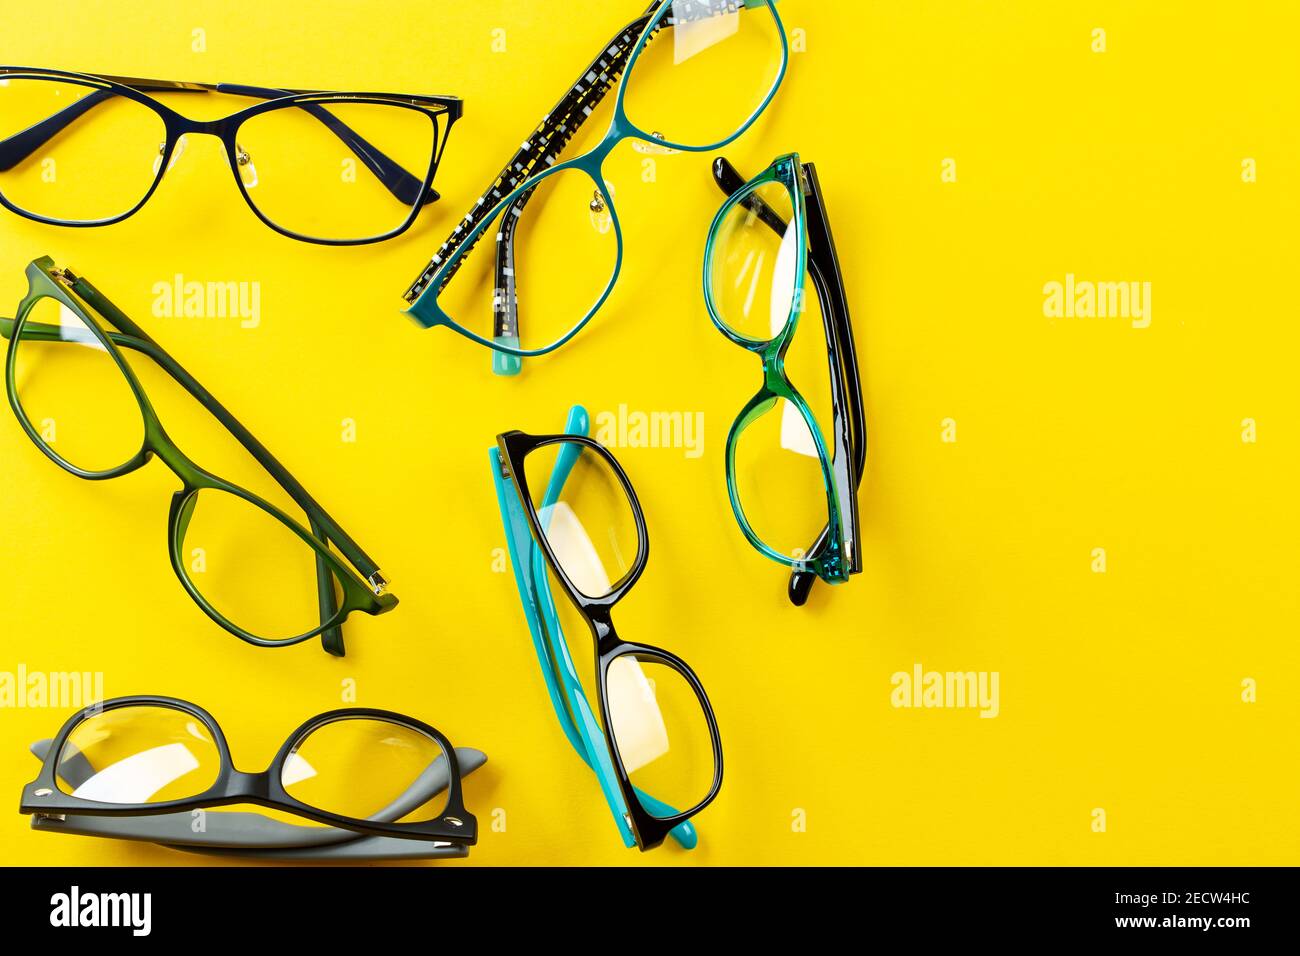 Many stylish glasses on a yellow background. Health, style and business concept. Eyesight correction. Space for text. Stock Photo